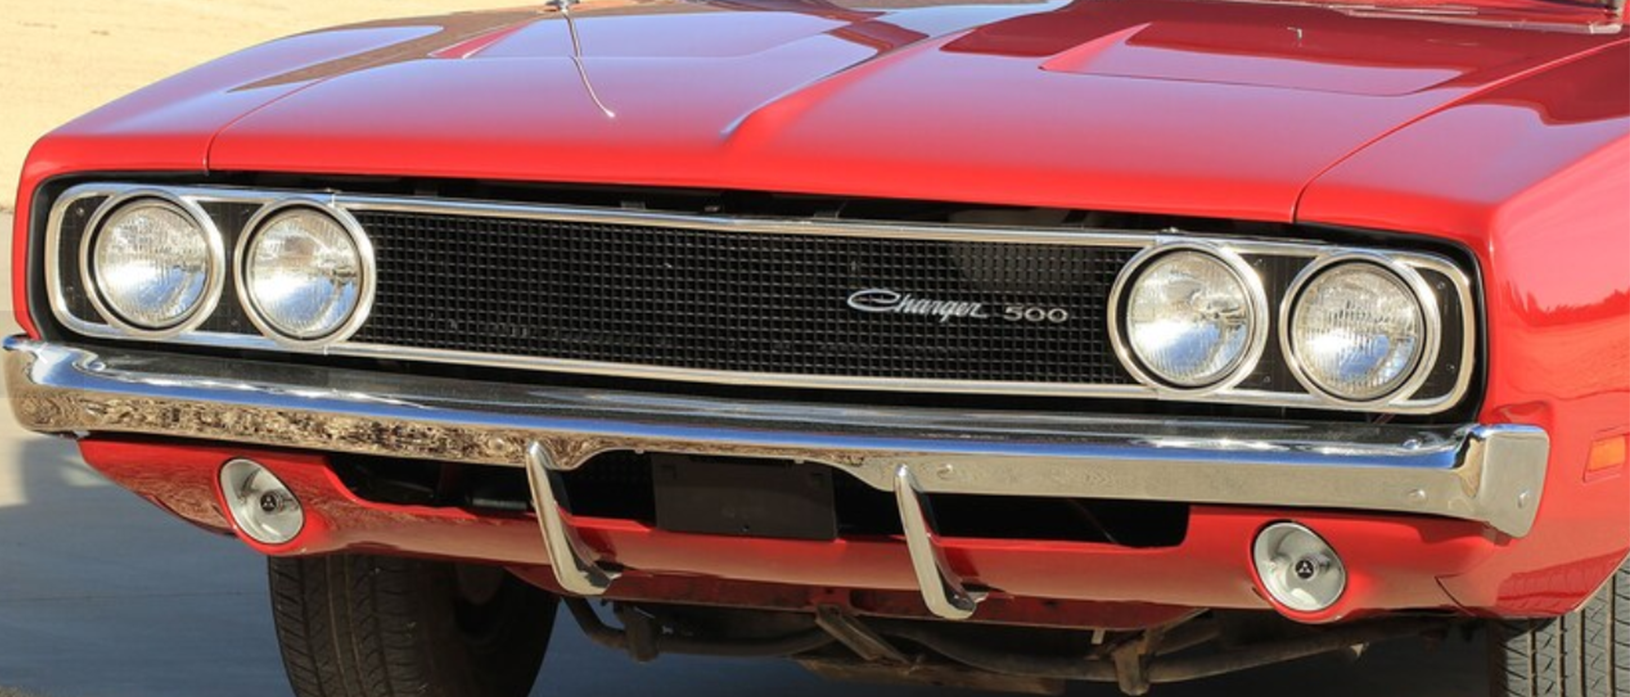 front end of 1969 dodge charger 500